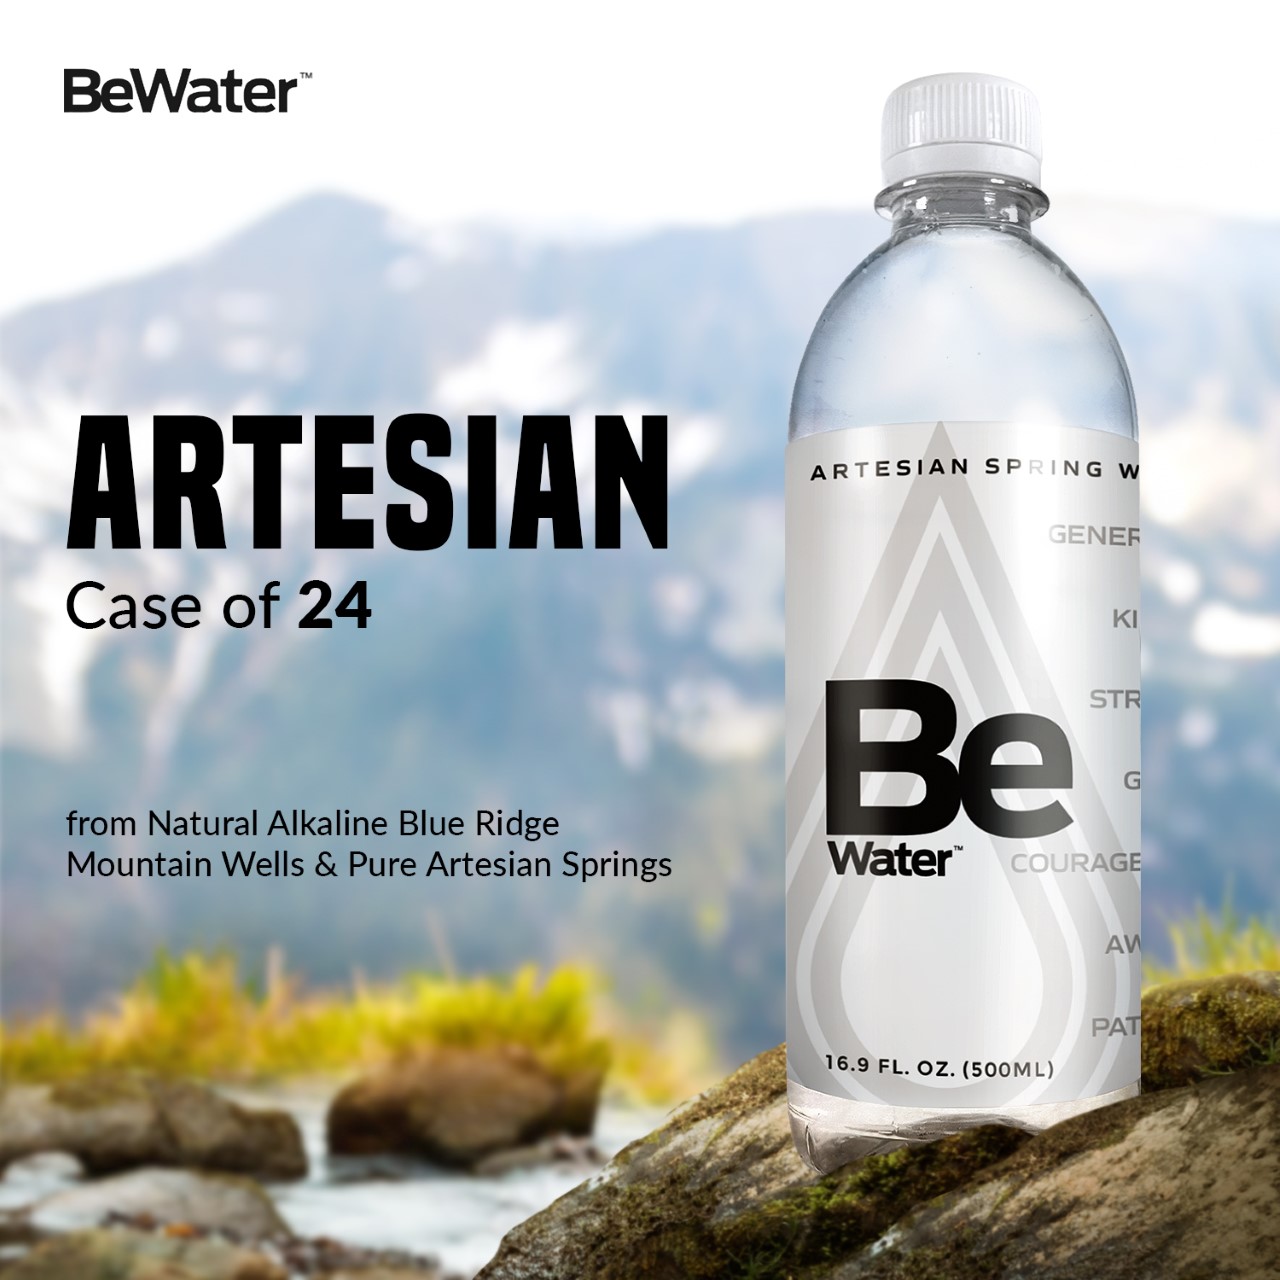 BE WATER,  a premium artesian bottled water that supports total body health and wellness